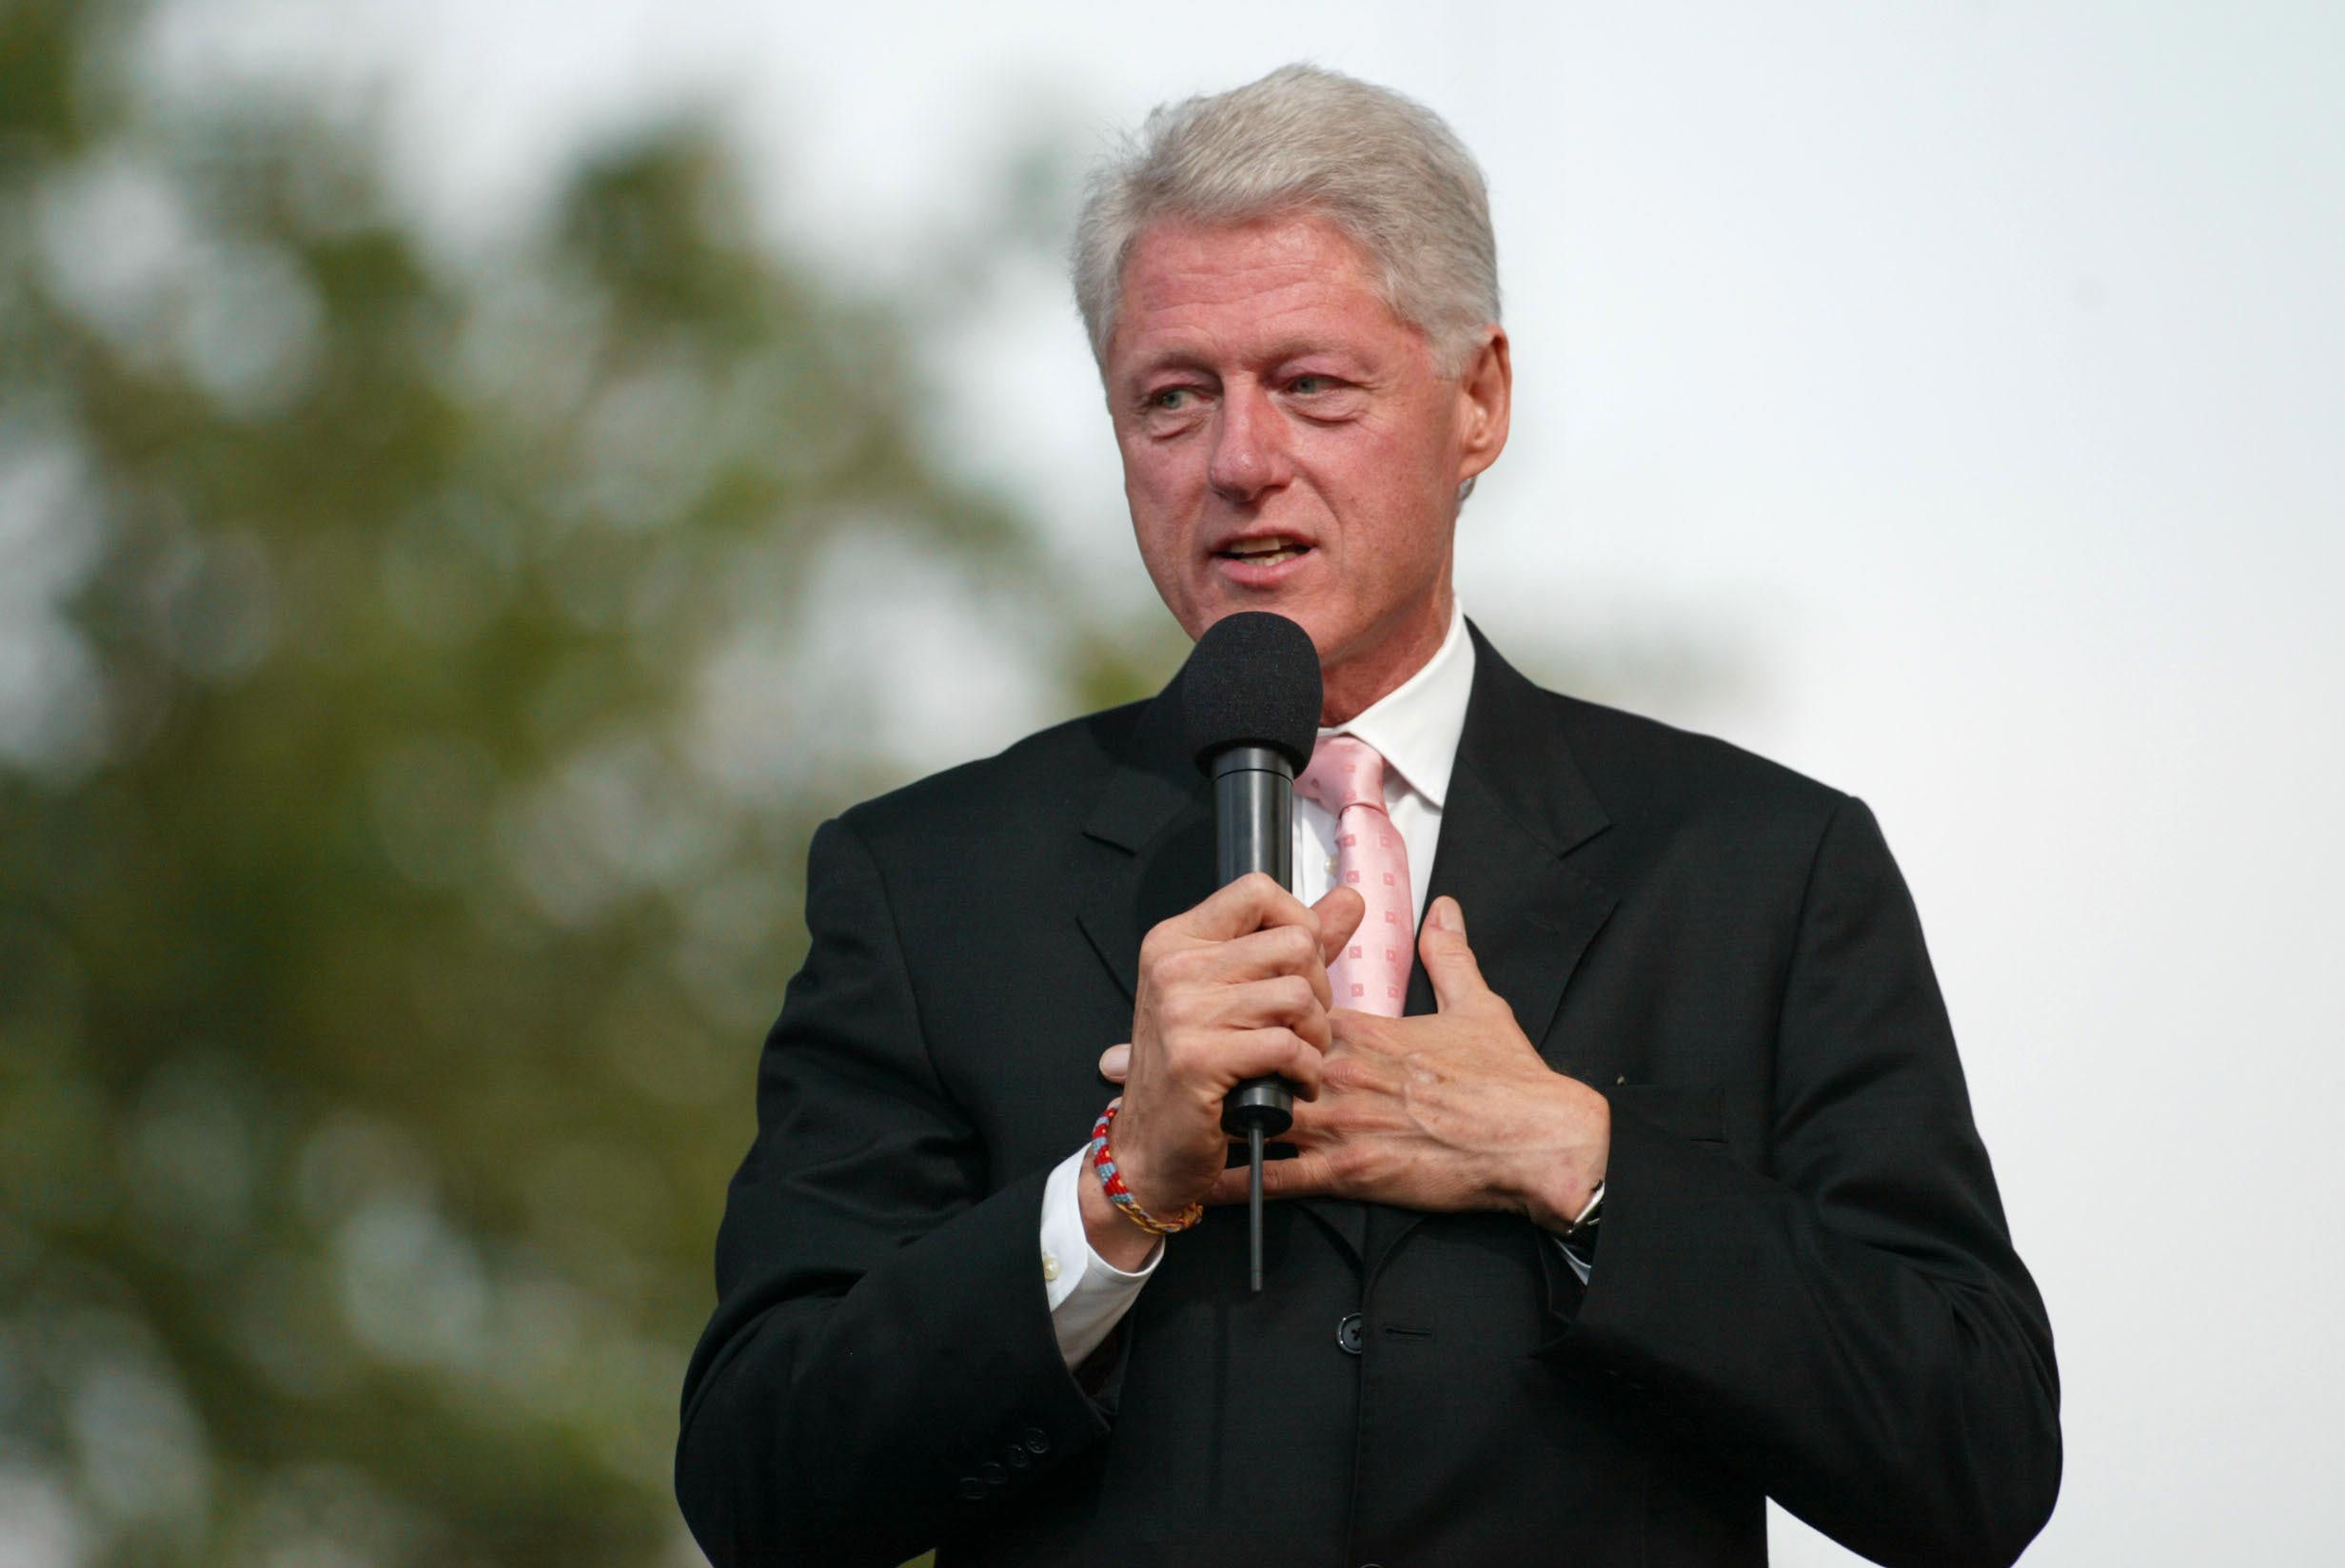 Bill Clinton standing on stage speaking into a microphone